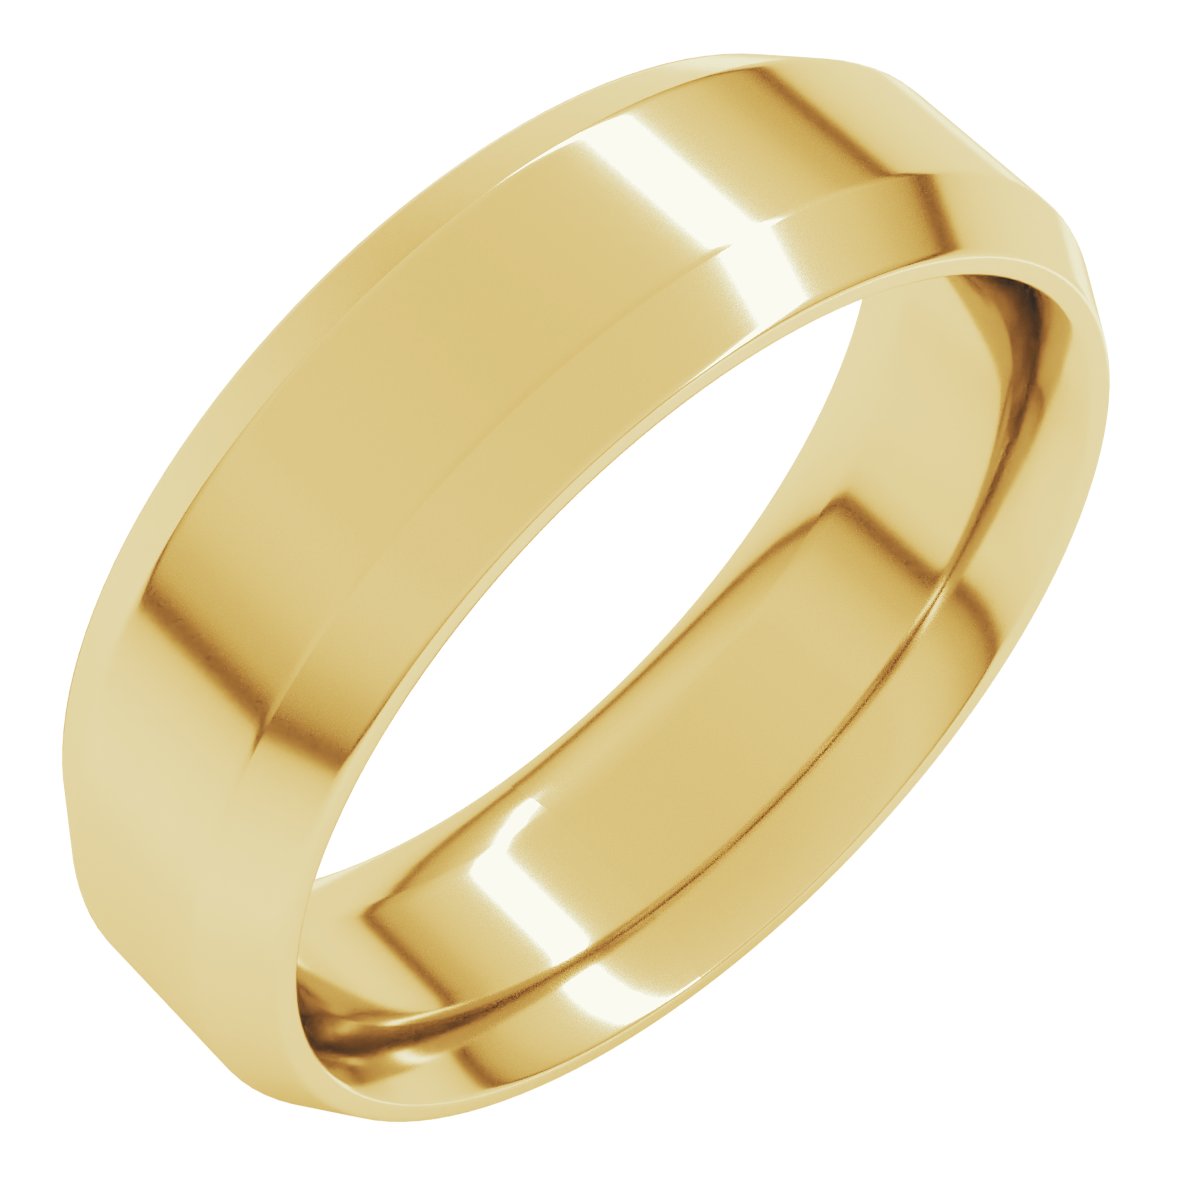 18K Yellow 6 mm Beveled-Edge Comfort-Fit Band Size 9.5